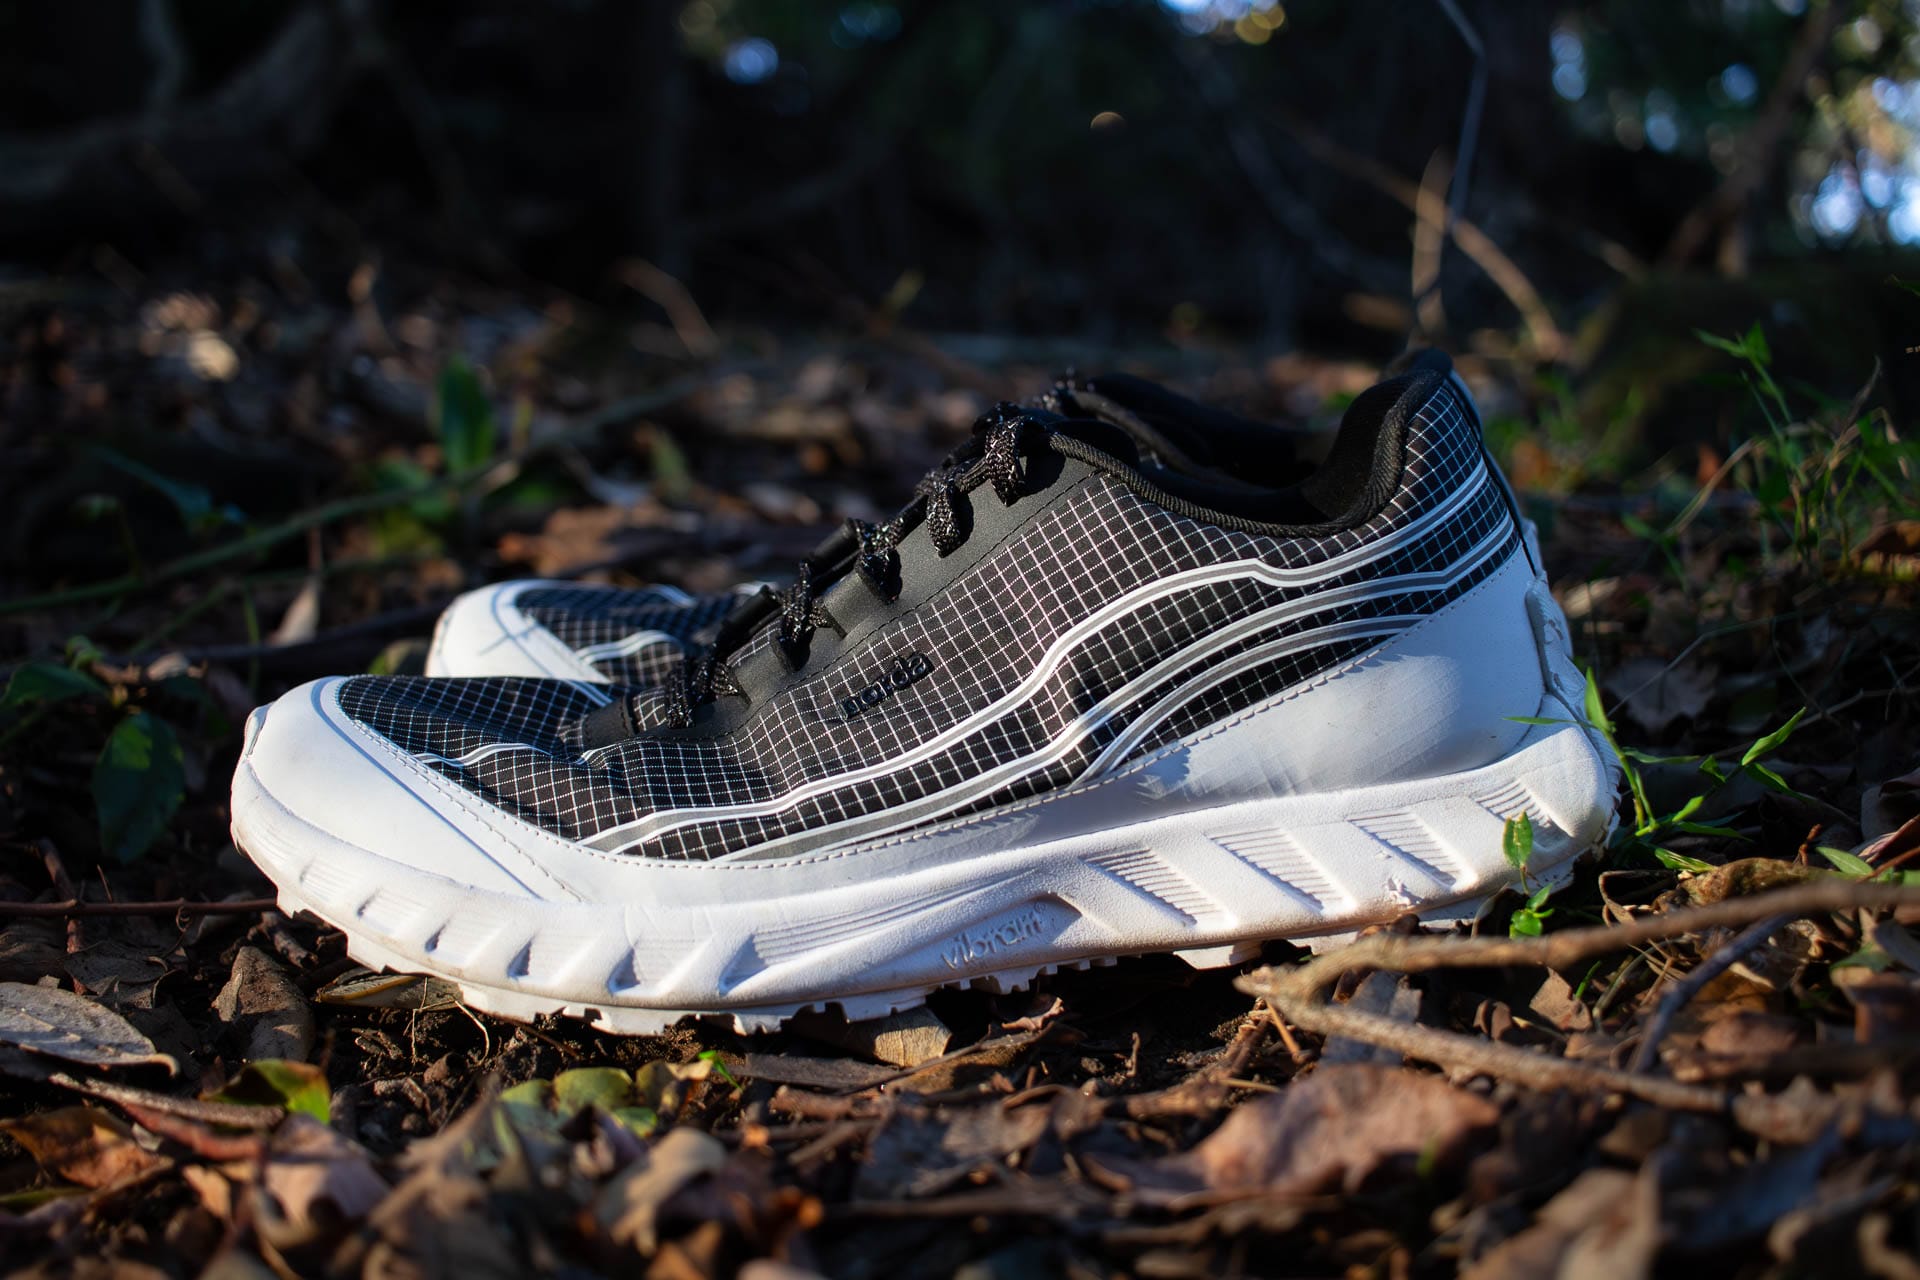 Norda 002 Trail Running Shoe – Reviewed & Tested - We Are Explorers